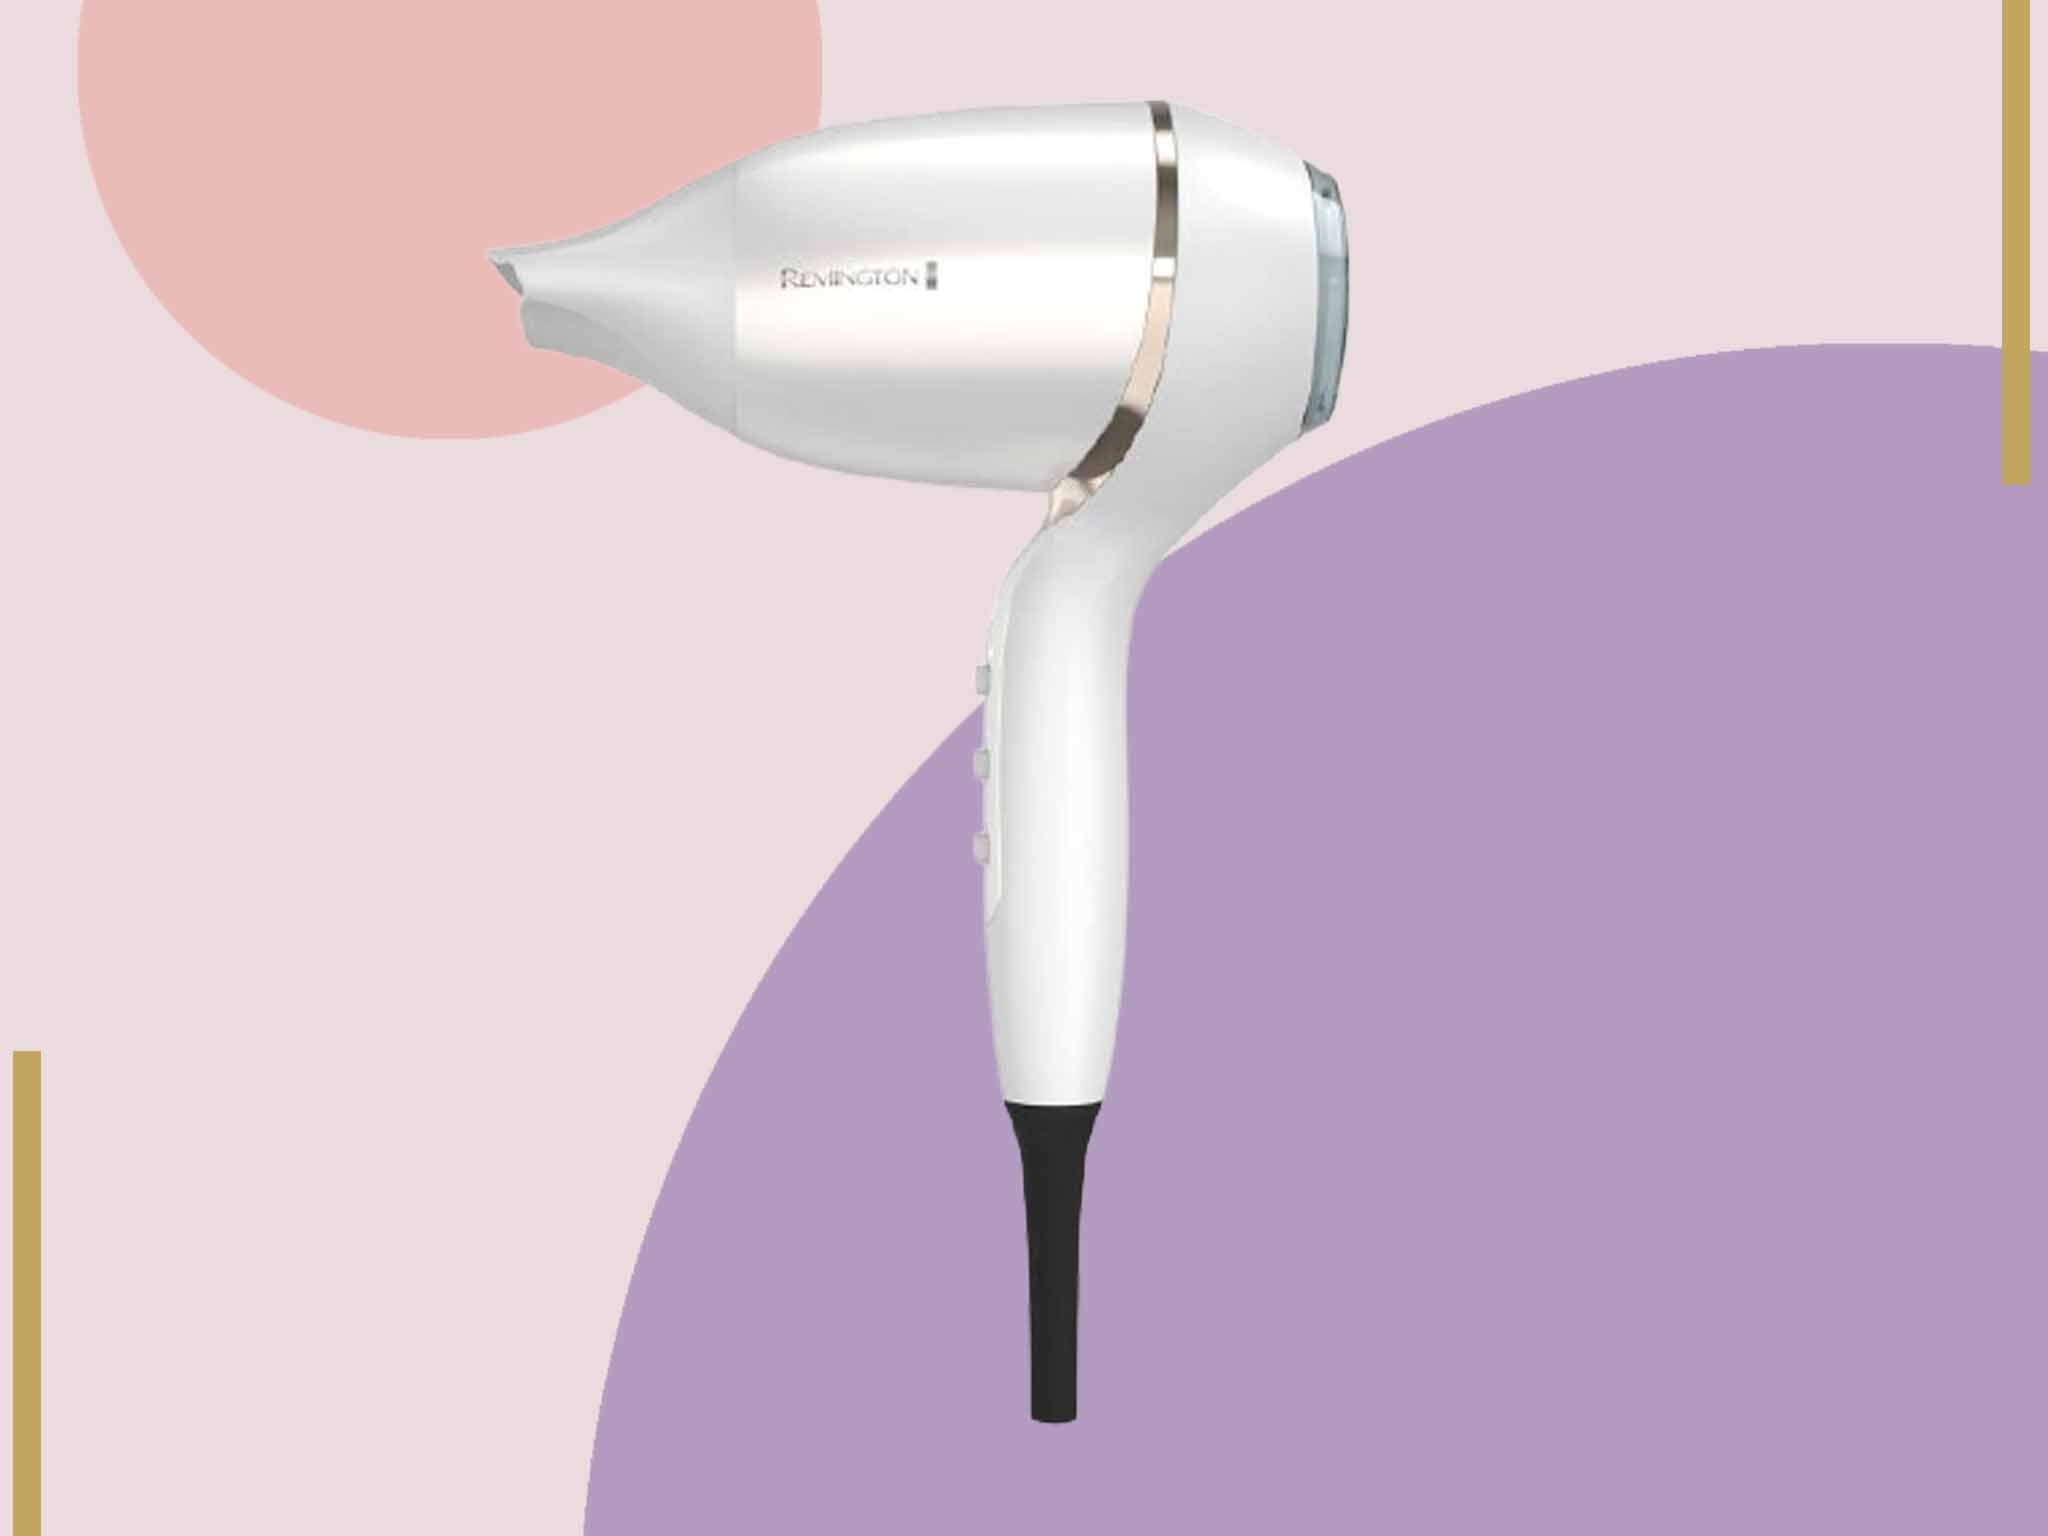 We tried this hair dryer for two weeks to conclude whether it helped our frazzled ends